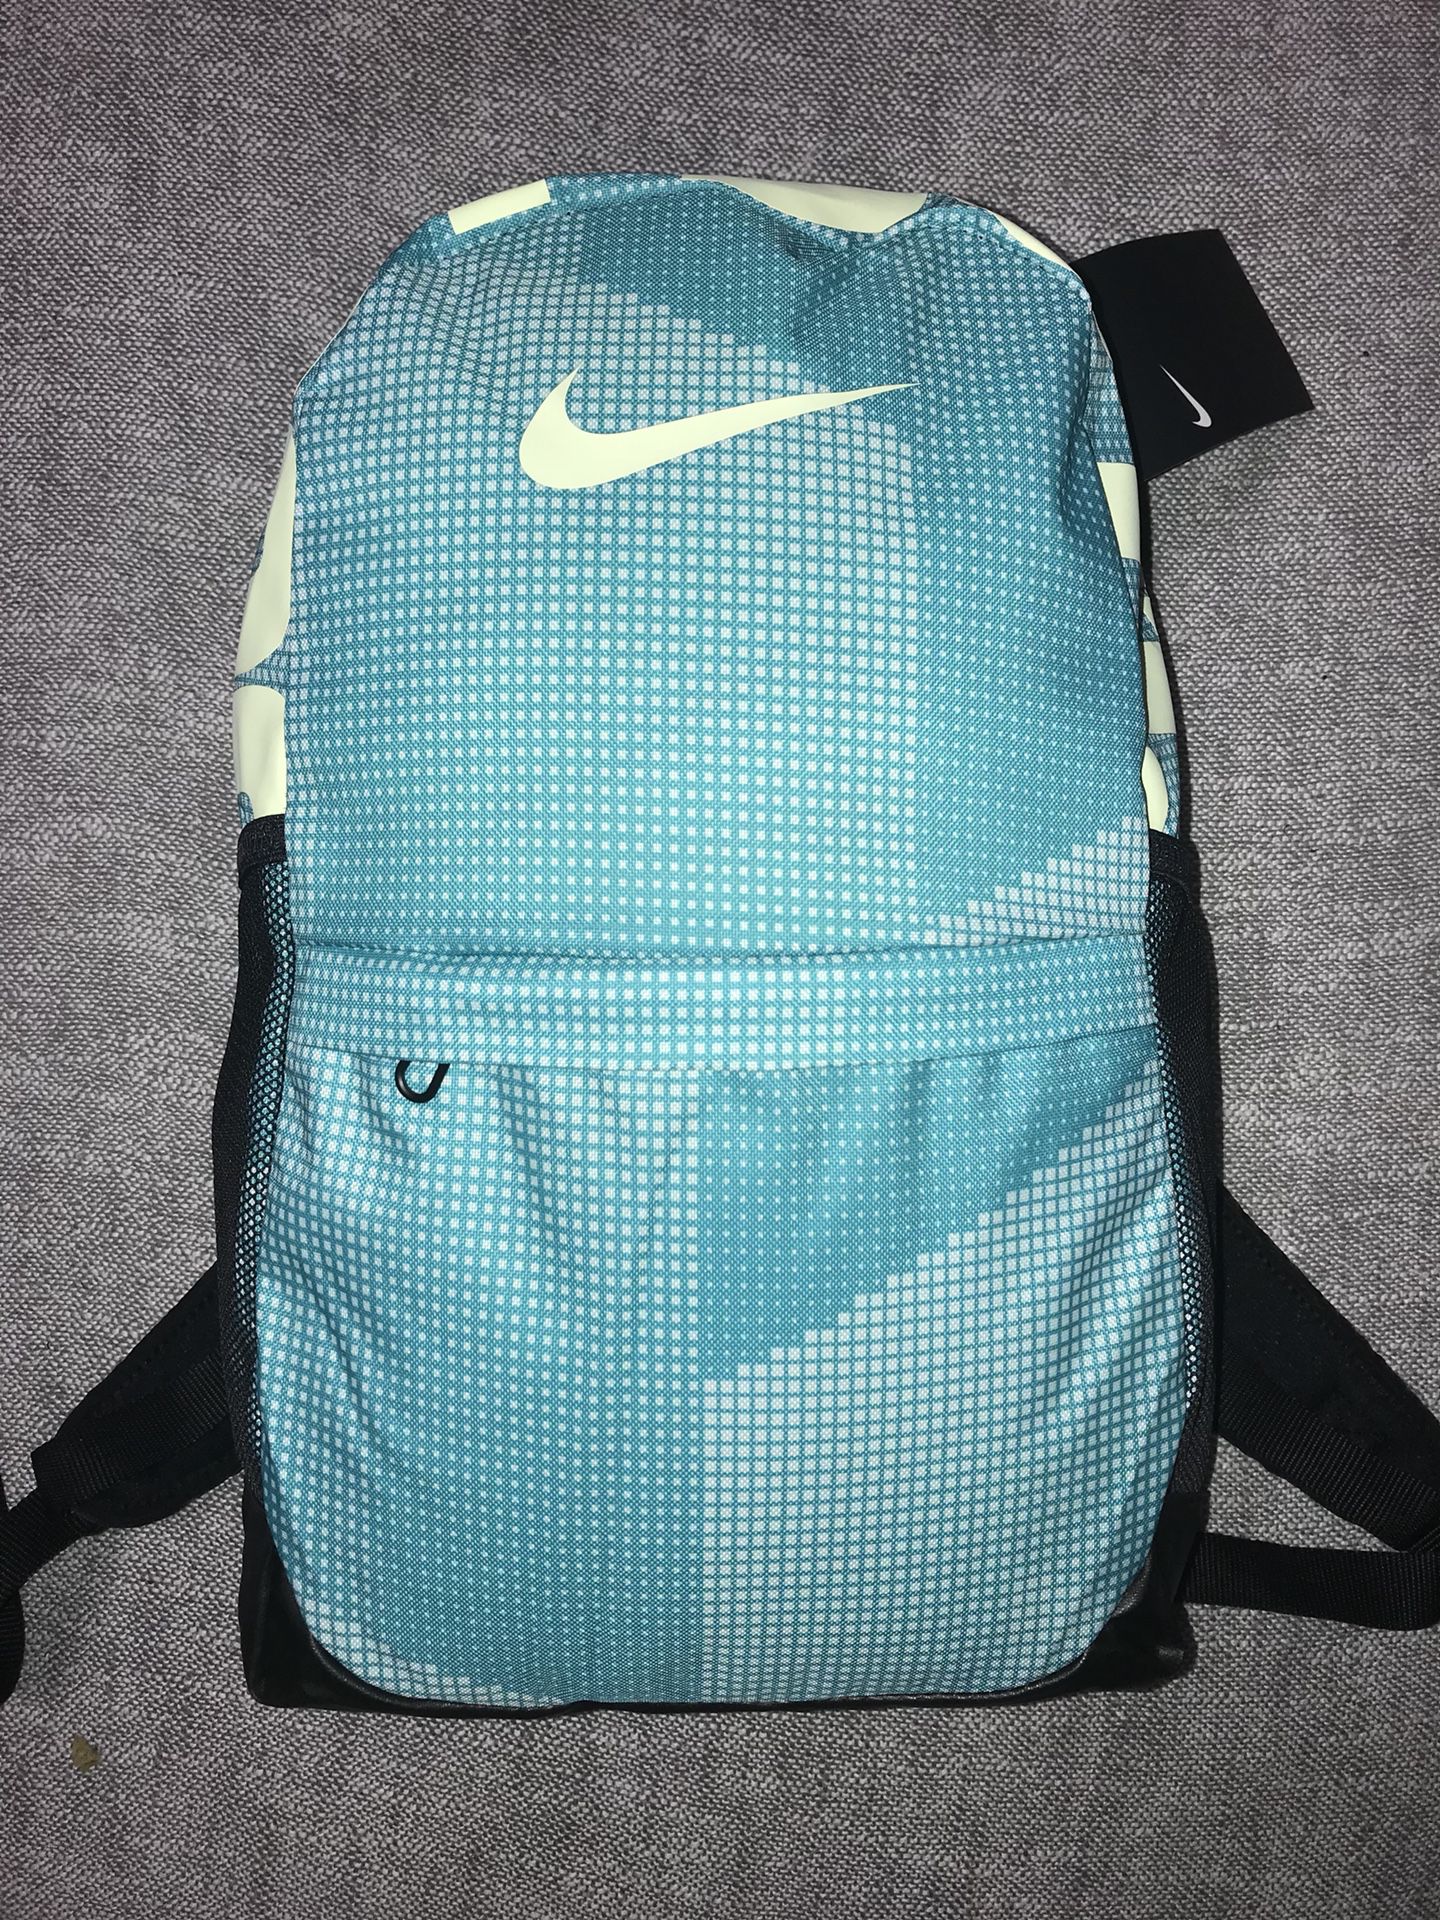 Nike backpack school bag NEW with tags